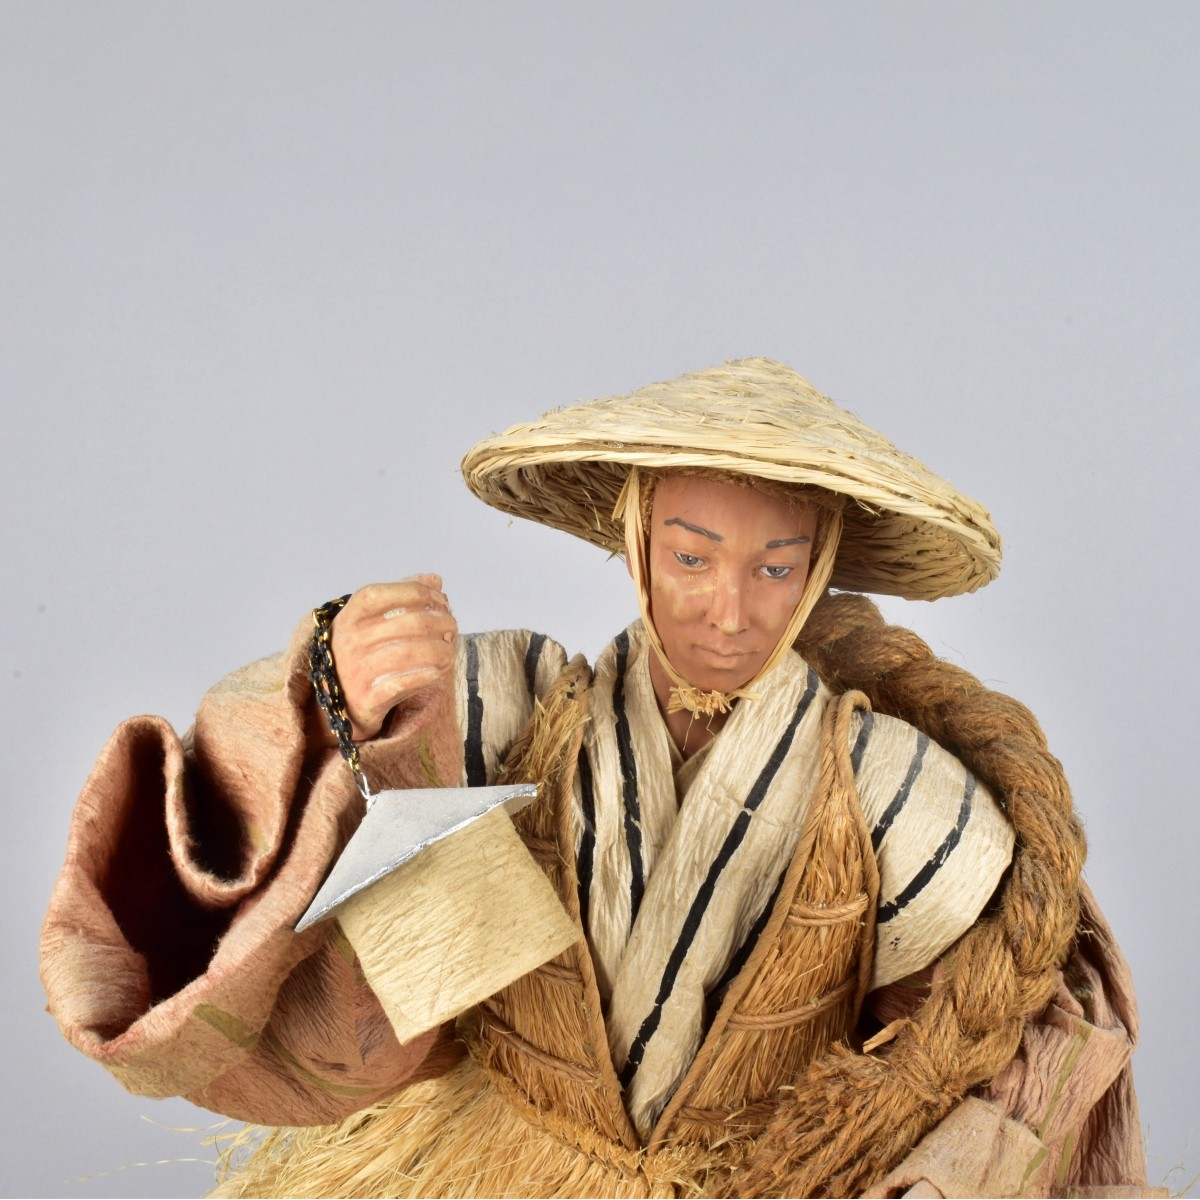 Antique Japanese Doll of a Fisherman